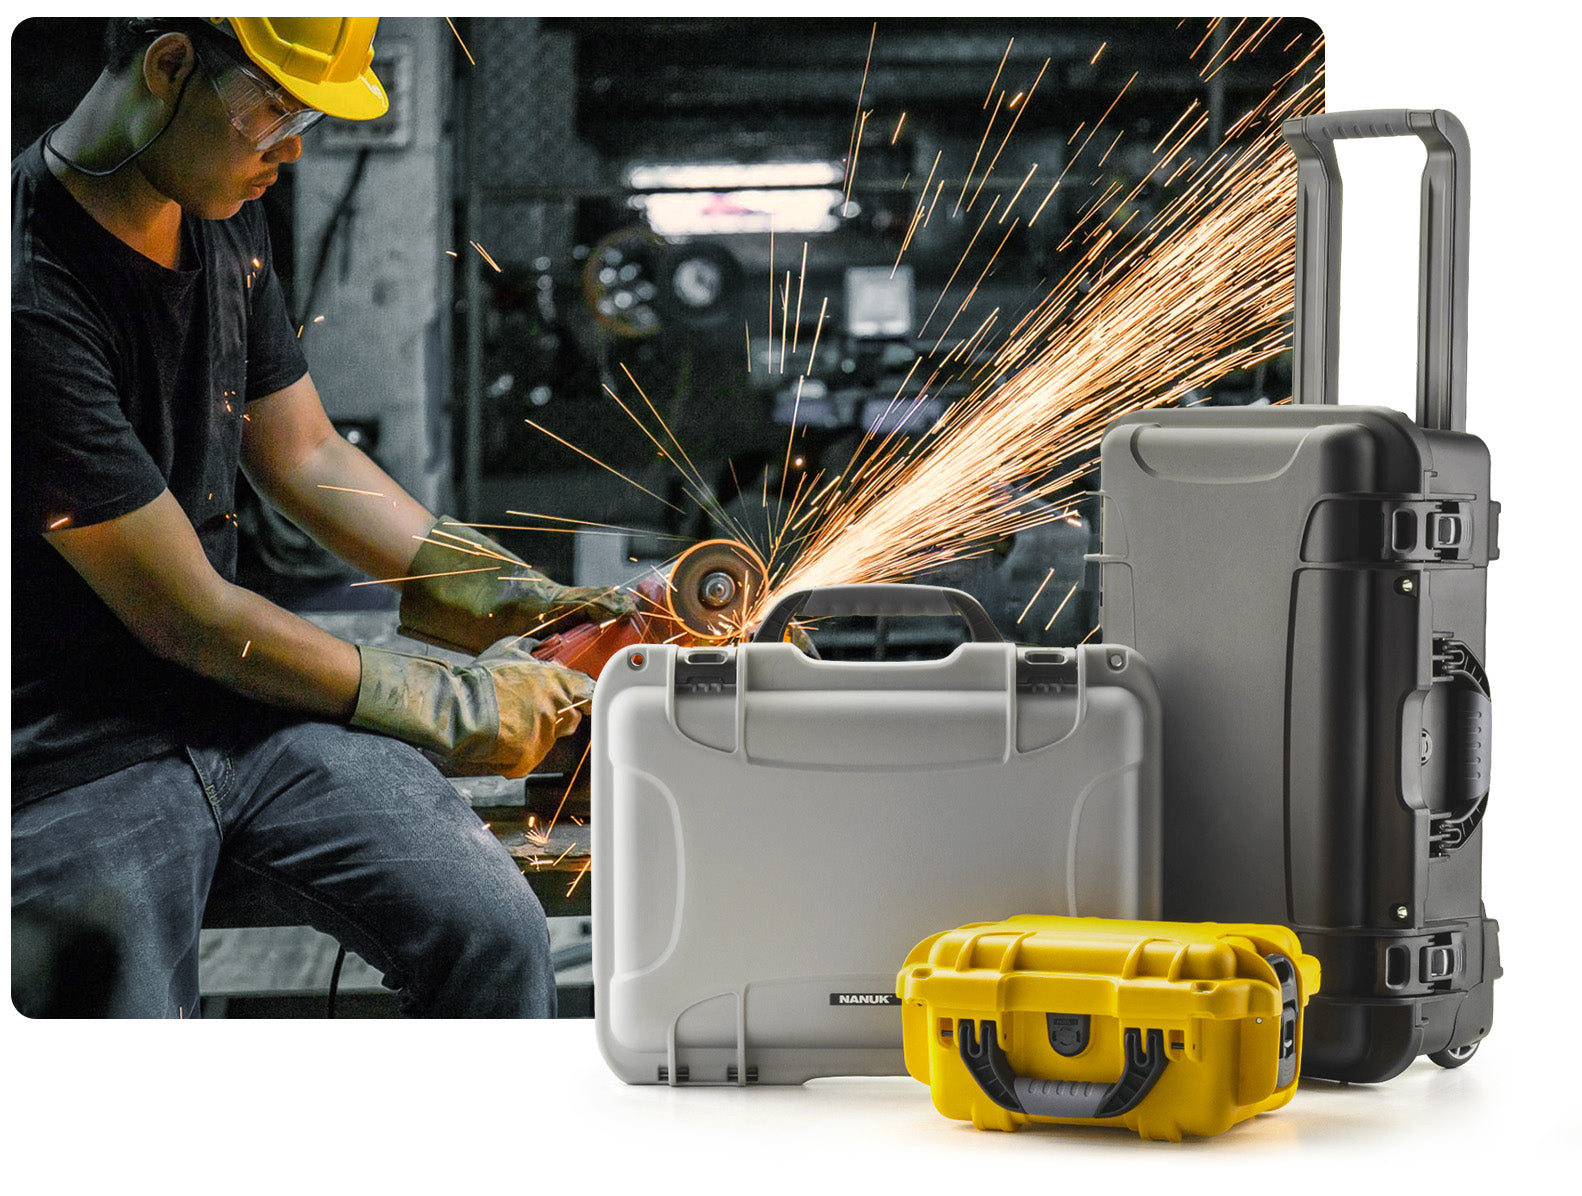 NANUK hard cases offer superior protection for valuable equipment, spare parts, tools, and first aid kits in industrial environments, ensuring they remain safe from impact, drops, and harsh conditions.